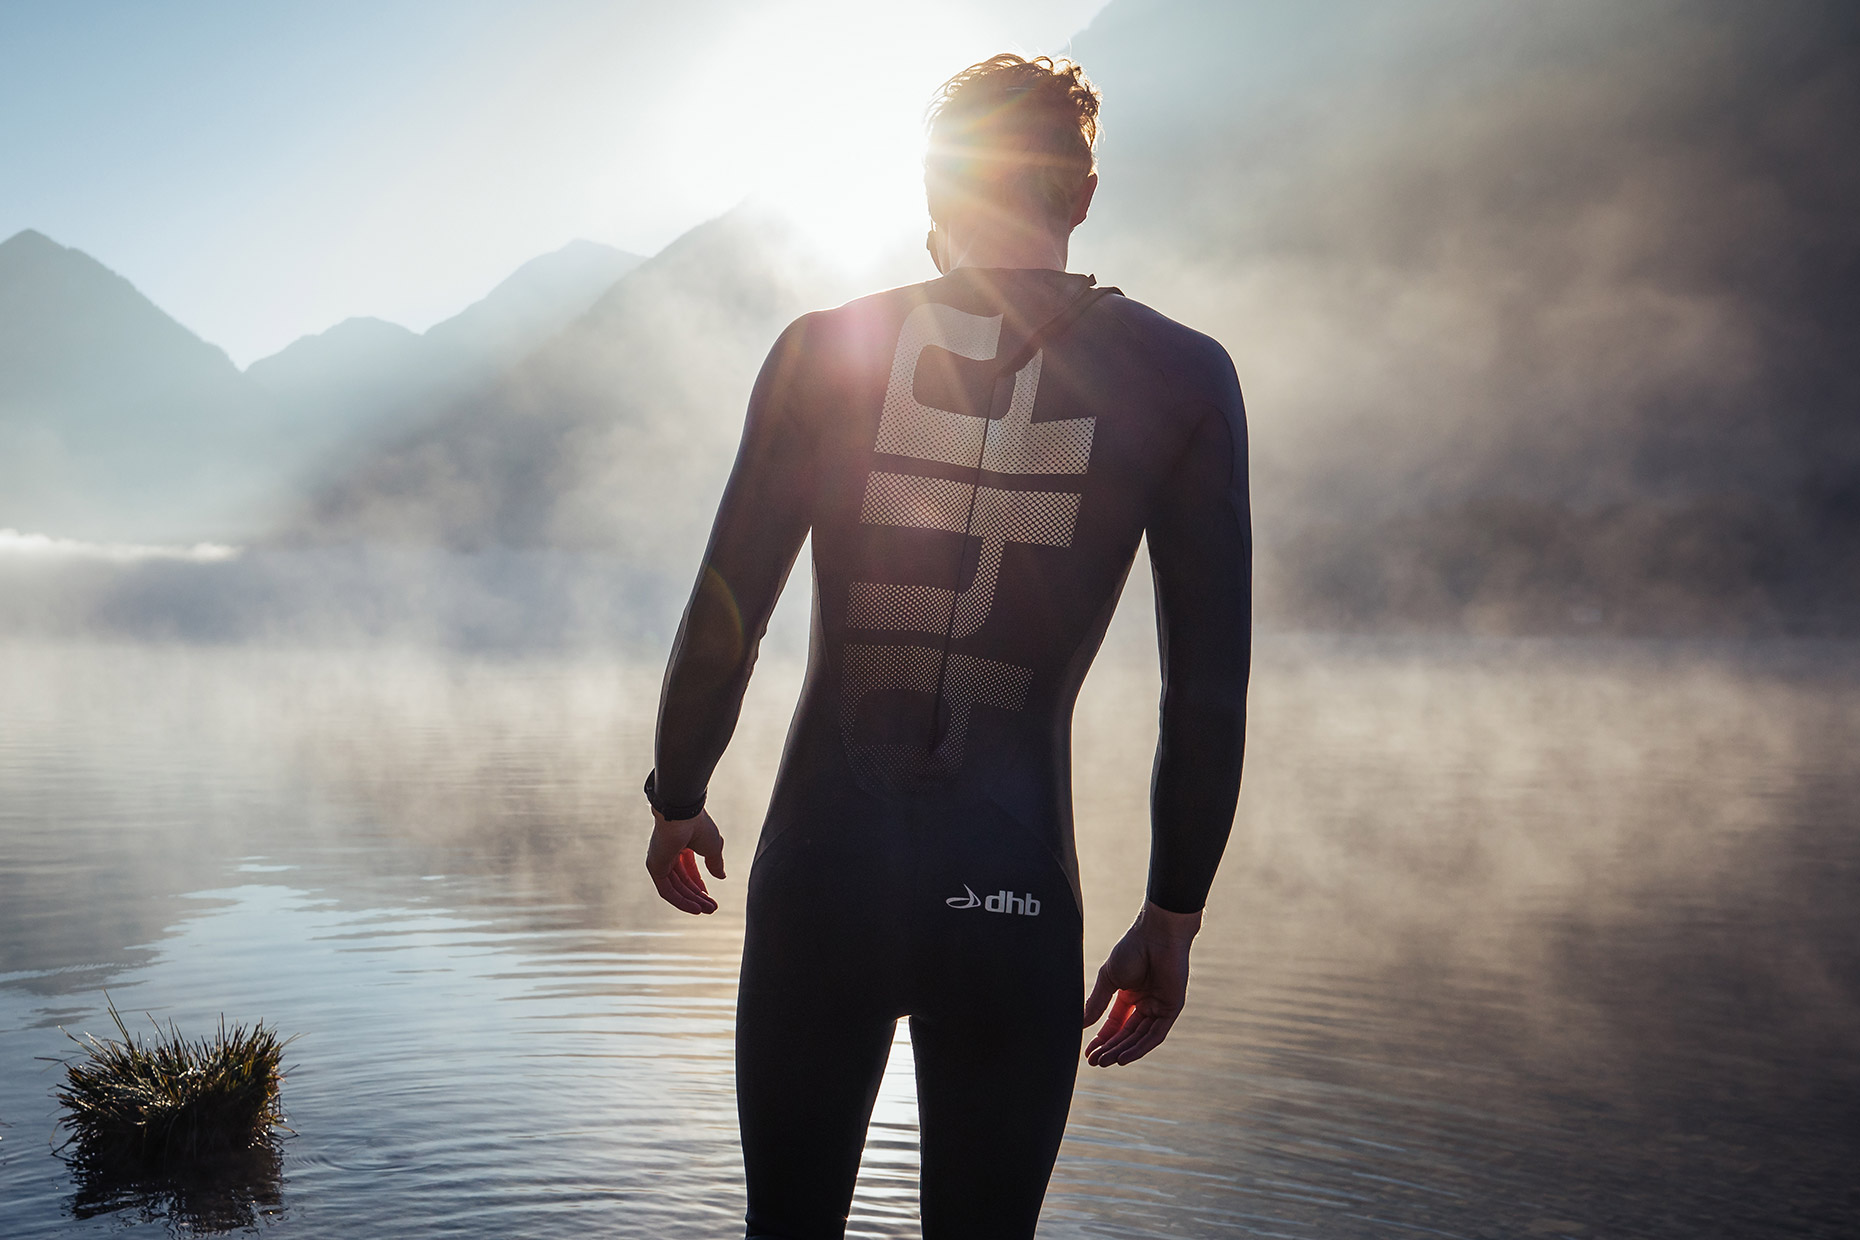 Male triathlete wearing a wetsuit standing on the edge of a lake at sunrise